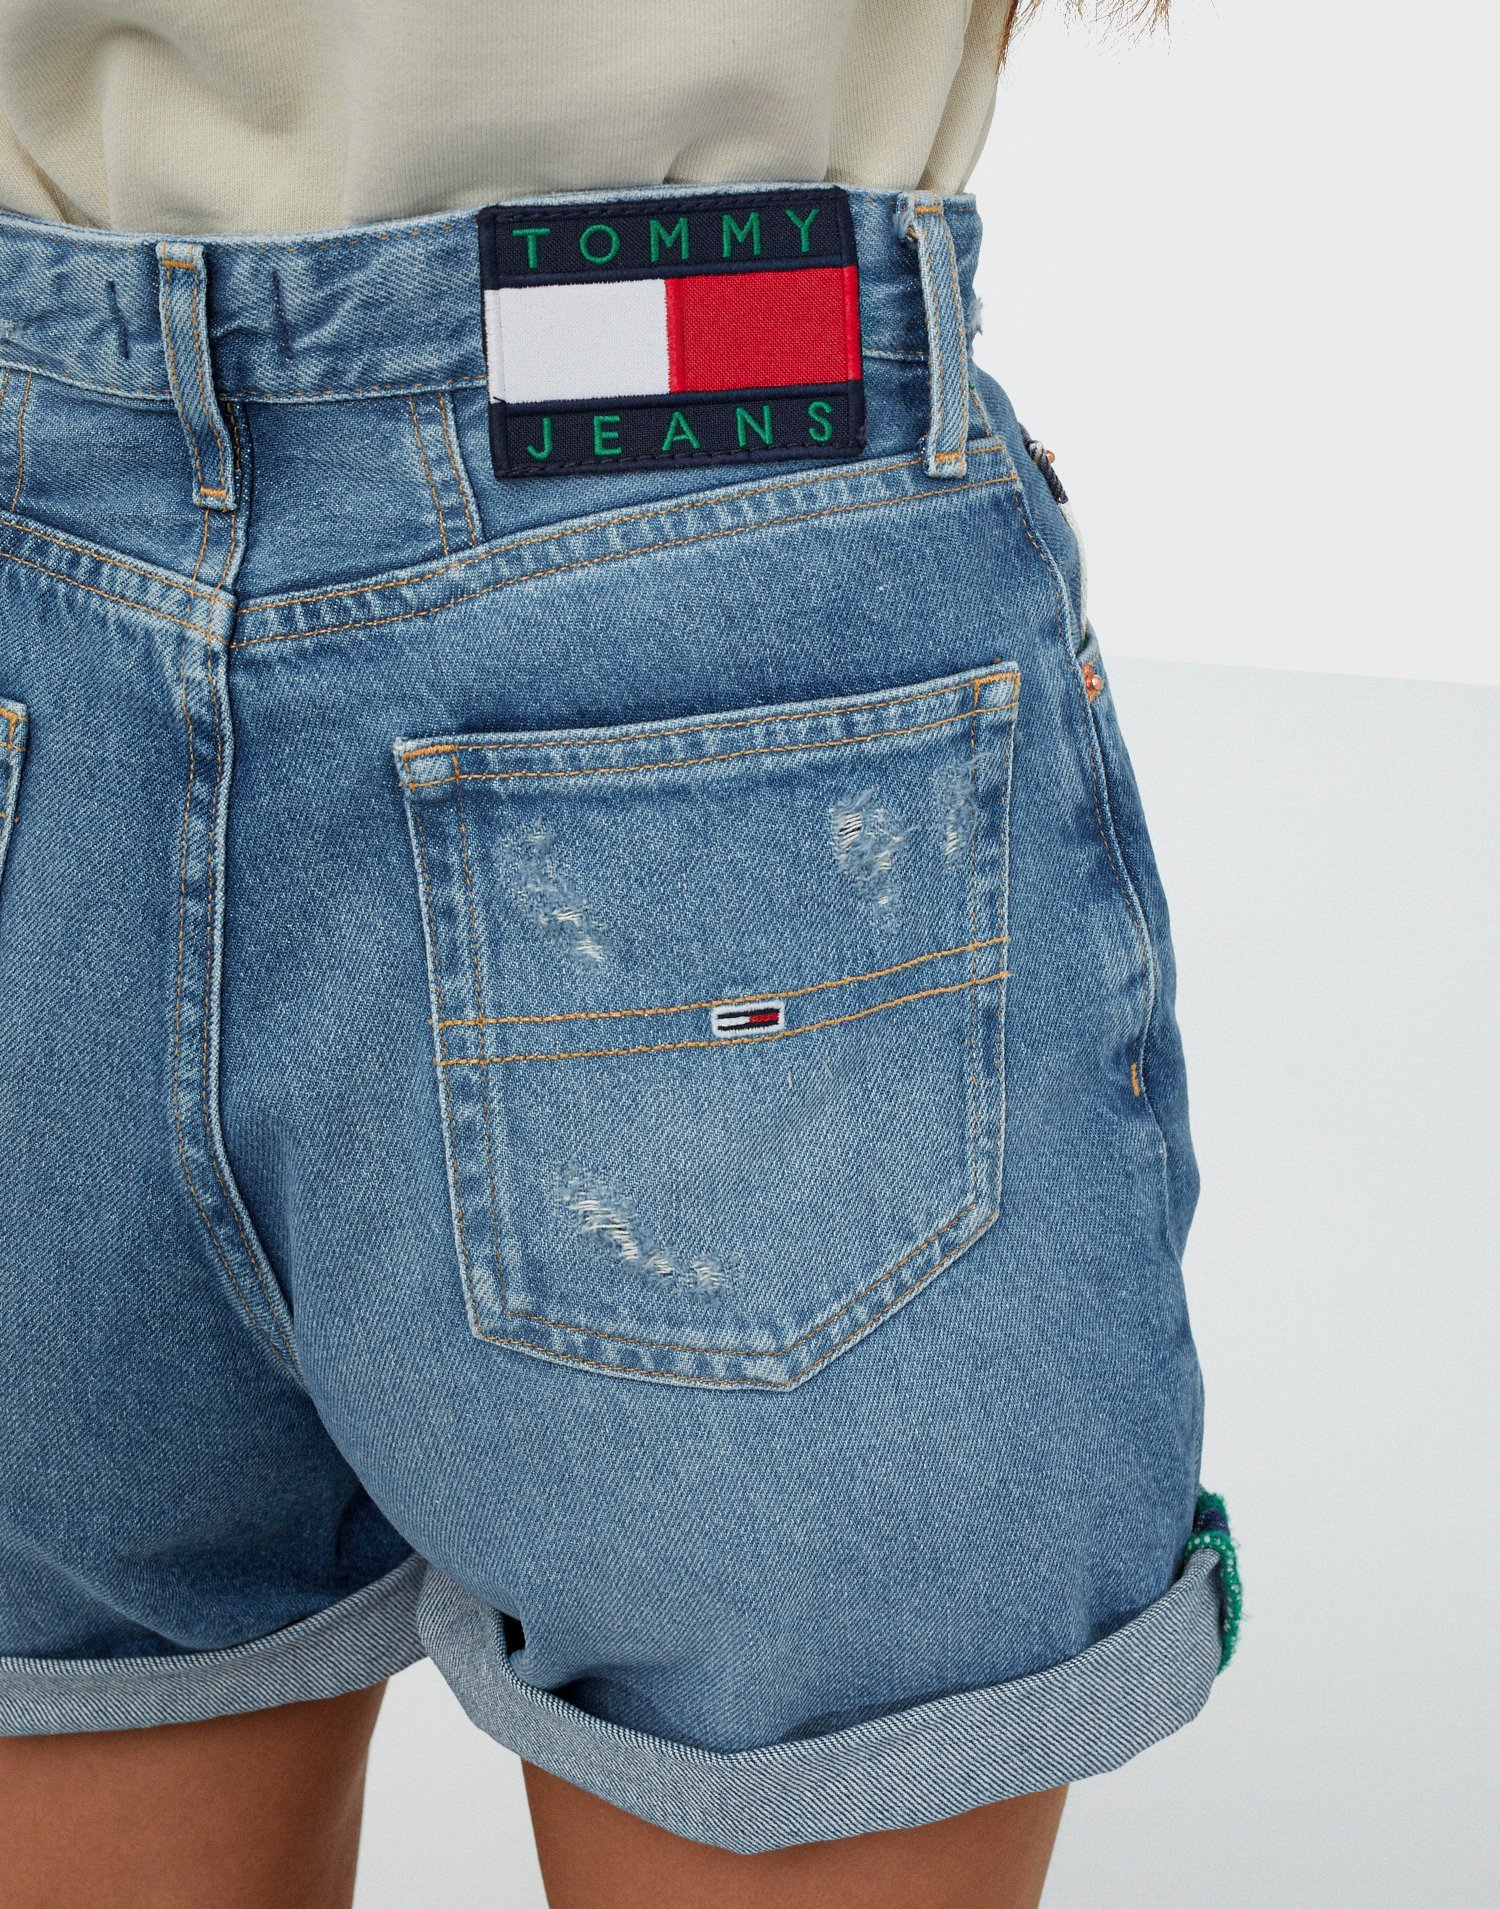 shorts tommy jeans